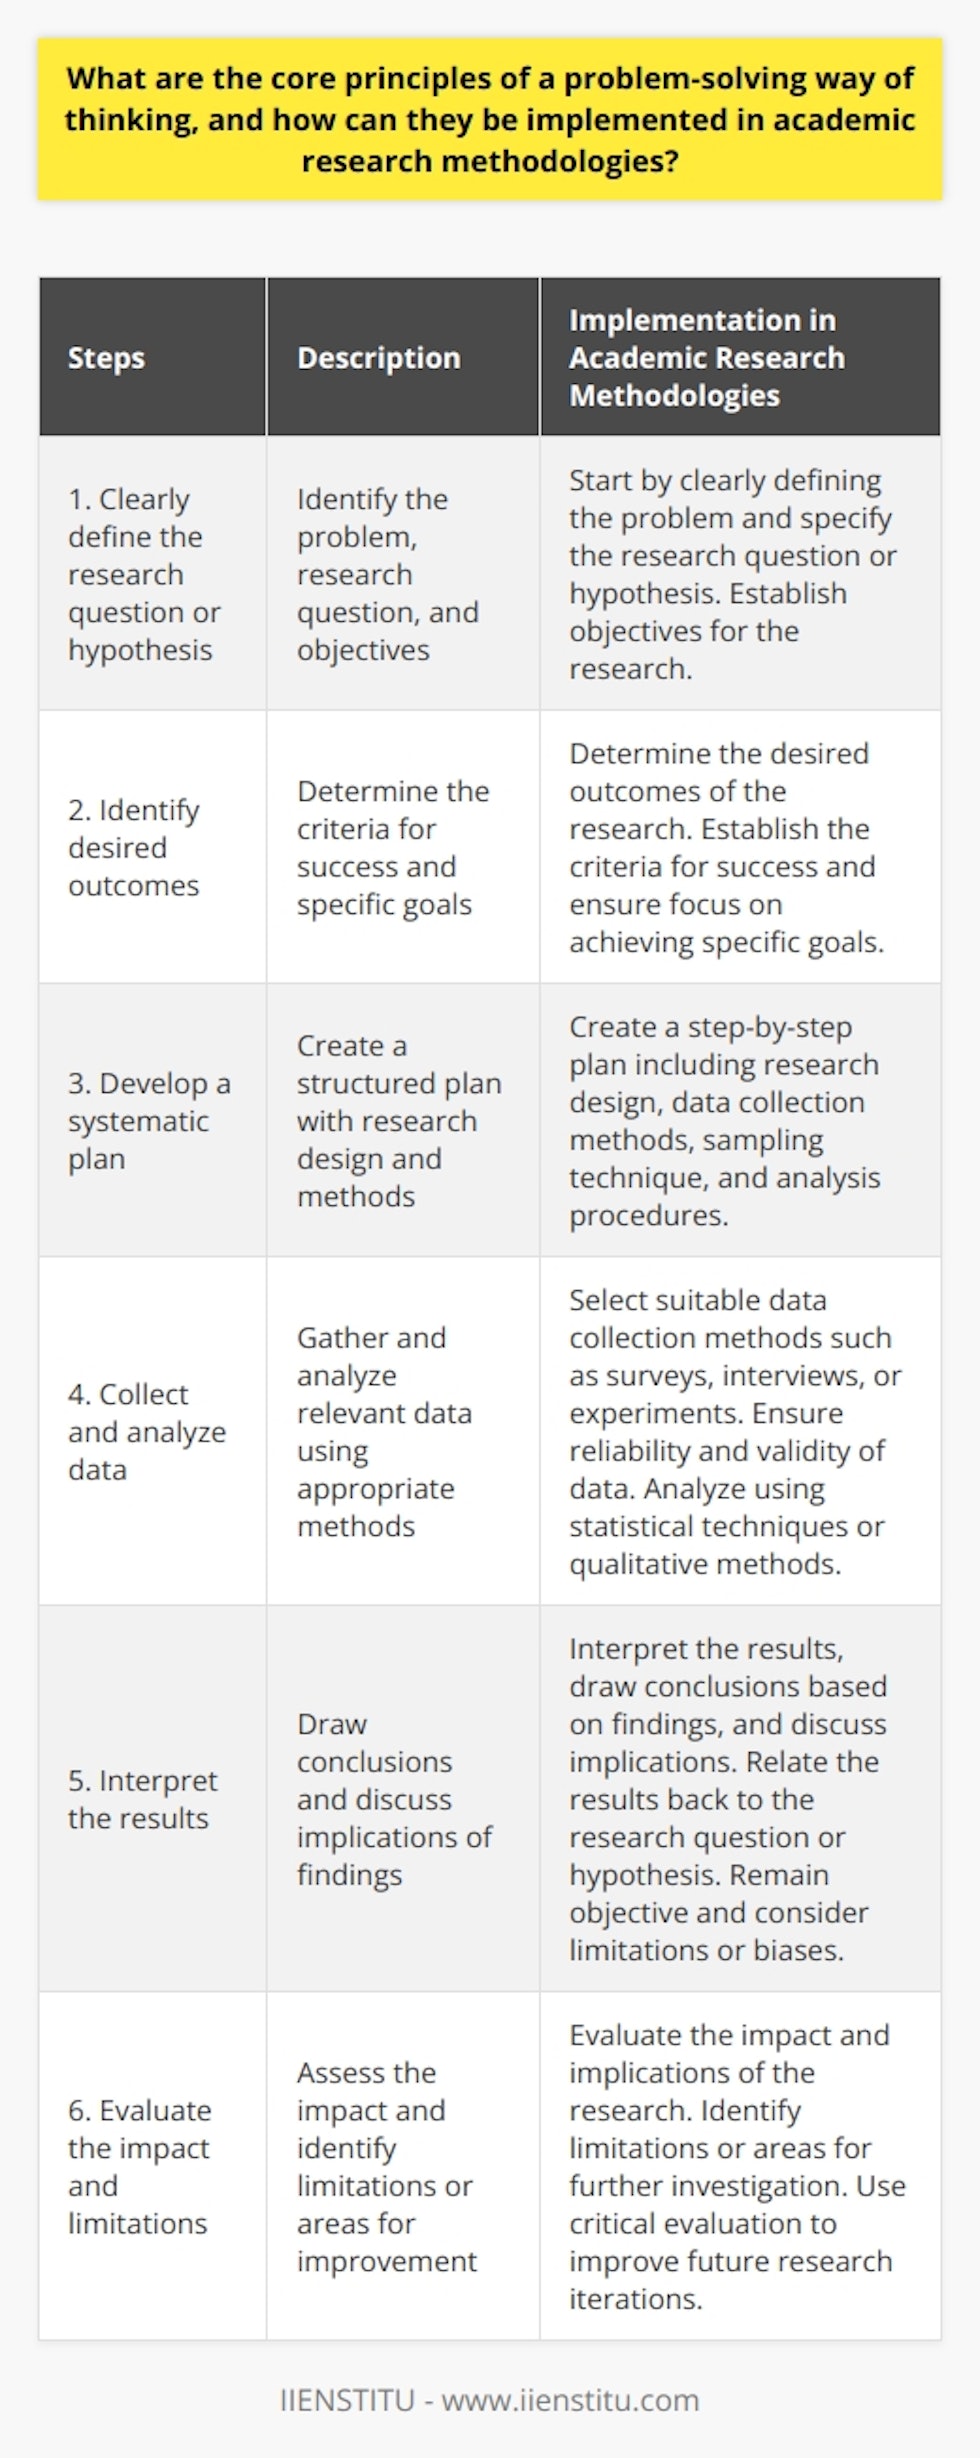 Researchers can implement problem-solving thinking in academic research methodologies by following these steps:1. Clearly define the research question or hypothesis: Researchers should start by clearly defining the problem they are seeking to address. This involves identifying the research question or hypothesis and specifying the objectives they aim to achieve.2. Identify desired outcomes: Researchers need to determine the desired outcomes of their research. This helps in establishing the criteria for success and ensuring that the research is focused on achieving specific goals.3. Develop a systematic plan: Researchers should develop a structured plan that outlines the steps they will take to address the research question. This plan should include details on the research design, data collection methods, sampling technique, and analysis procedures.4. Collect and analyze data: Researchers need to collect and analyze relevant data to generate empirical evidence. They should select appropriate data collection methods, such as surveys, interviews, or experiments, and ensure that the data collected is reliable and valid. The analysis of the data should be conducted using appropriate statistical techniques or qualitative methods, depending on the nature of the research.5. Interpret the results: Researchers must interpret the results of their analysis and draw conclusions based on the findings. They should discuss the implications of the results and relate them back to the research question or hypothesis. It is essential to remain objective and consider any limitations or potential biases that may have influenced the findings.6. Evaluate the impact and limitations: Researchers should evaluate the impact of their research by considering its implications and potential contributions to the field. They should also identify any limitations or areas for further investigation. This critical evaluation helps in identifying potential improvements for future research iterations.By integrating problem-solving thinking into academic research methodologies, researchers can enhance the quality and rigor of their work. It provides a structured and systematic approach to addressing research questions, ensuring that researchers can effectively analyze and interpret data, and draw meaningful conclusions. This approach also ensures that research is conducted ethically, following established guidelines and principles.